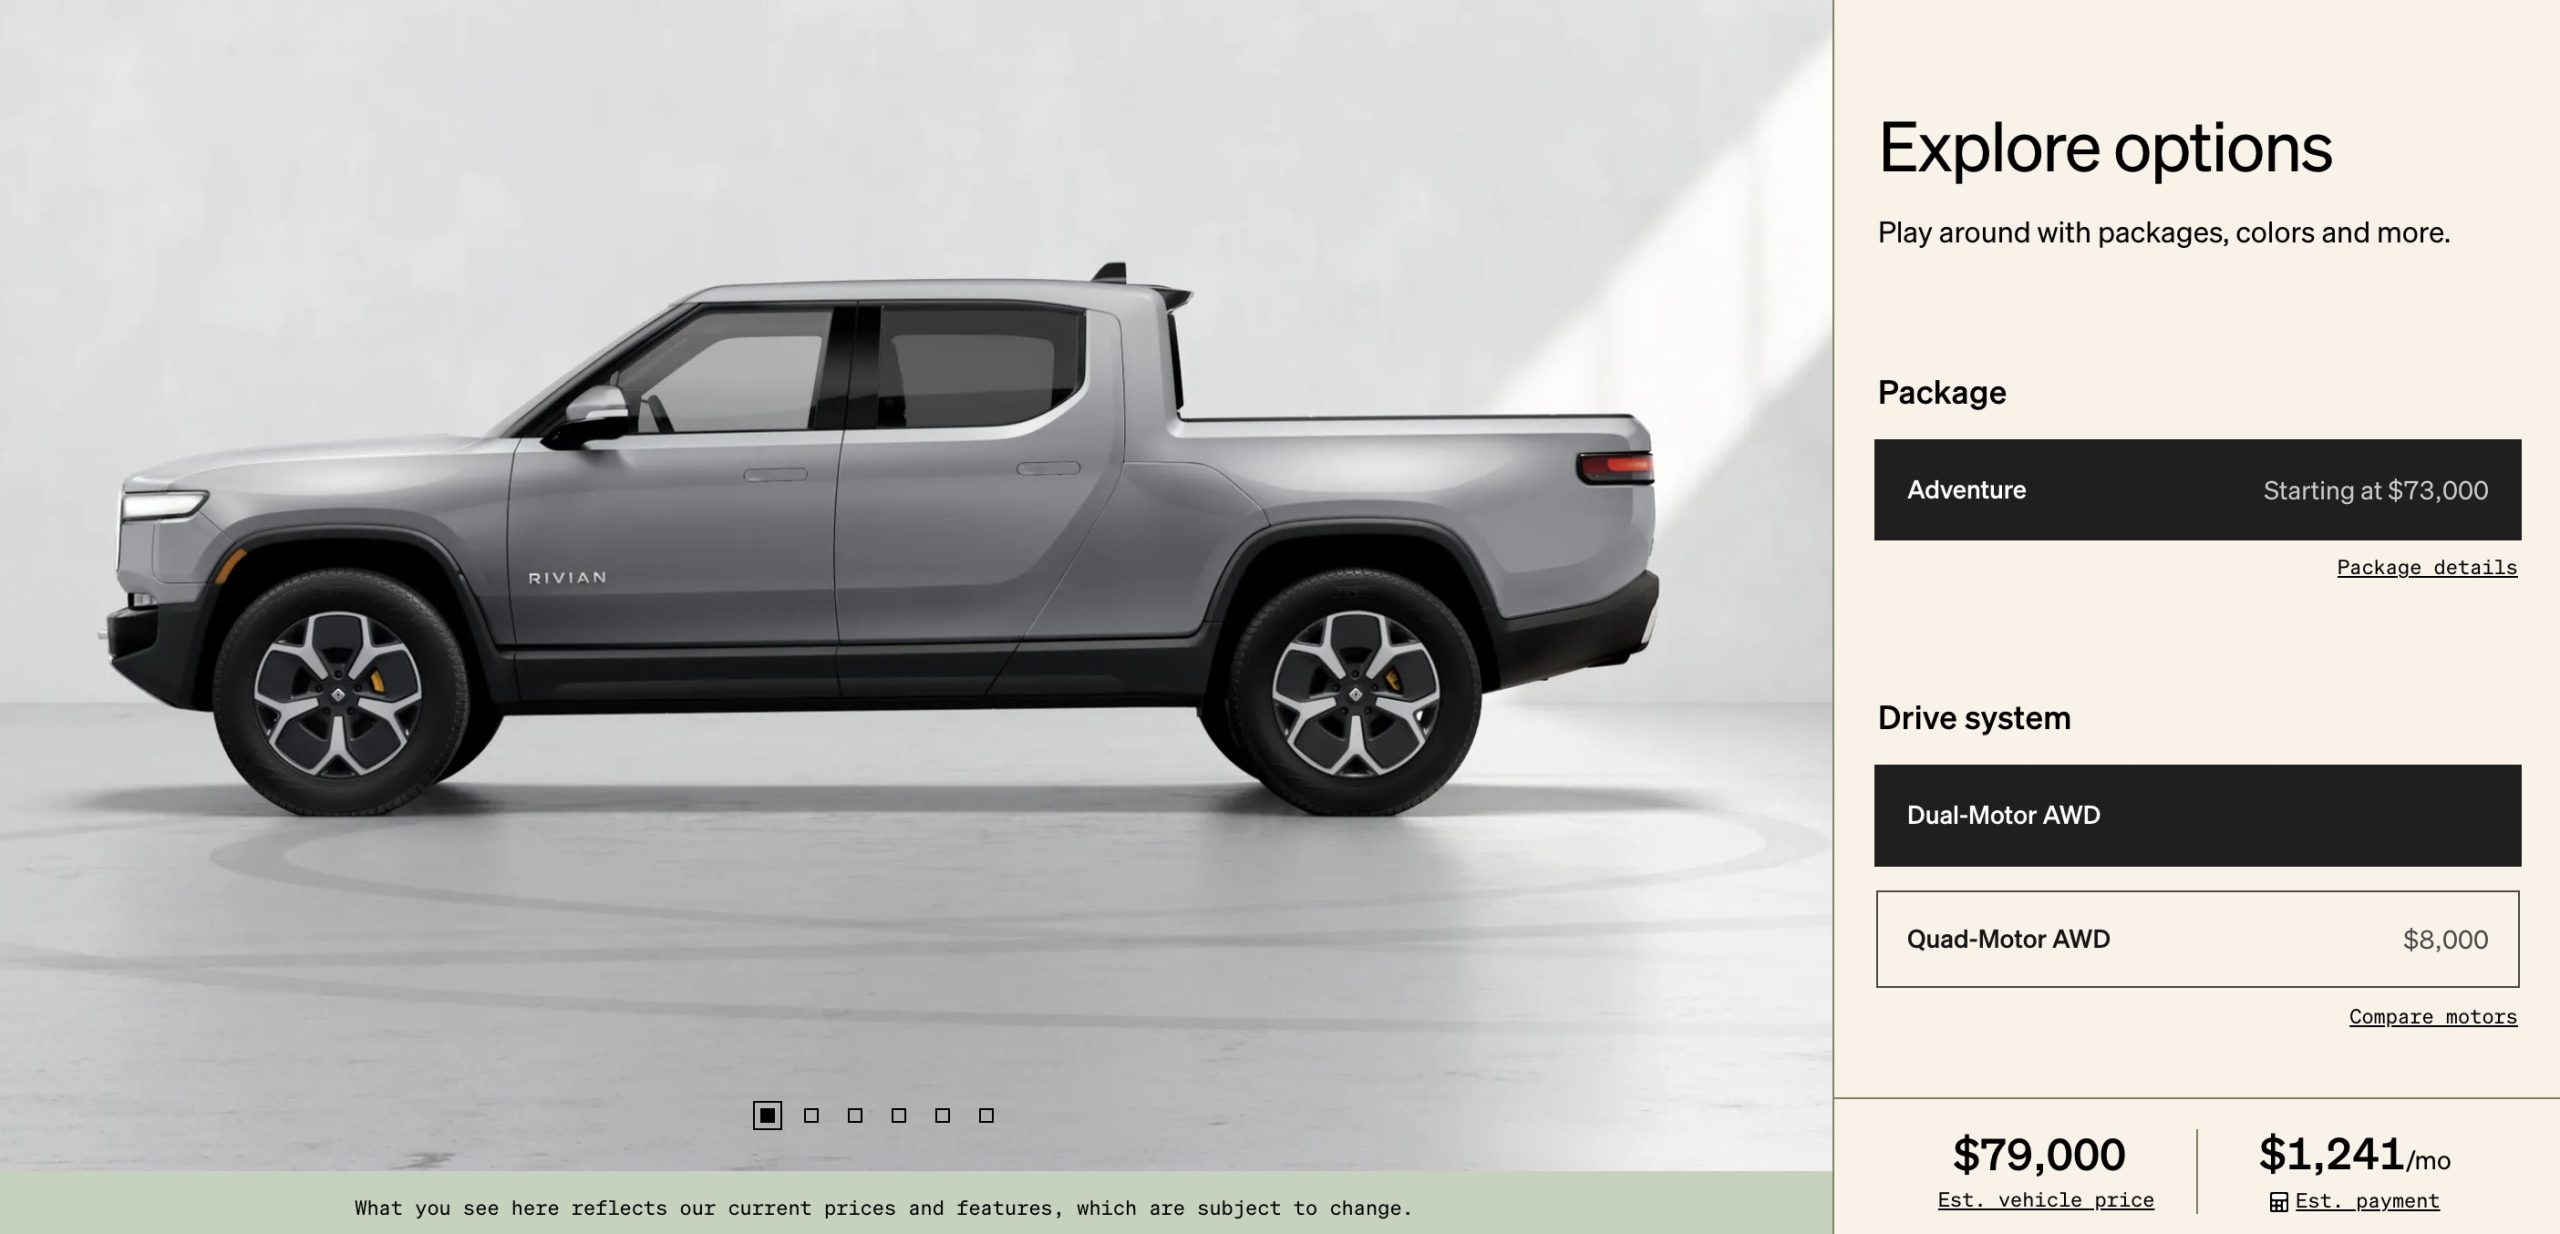 Rivian discontinues Explore Package